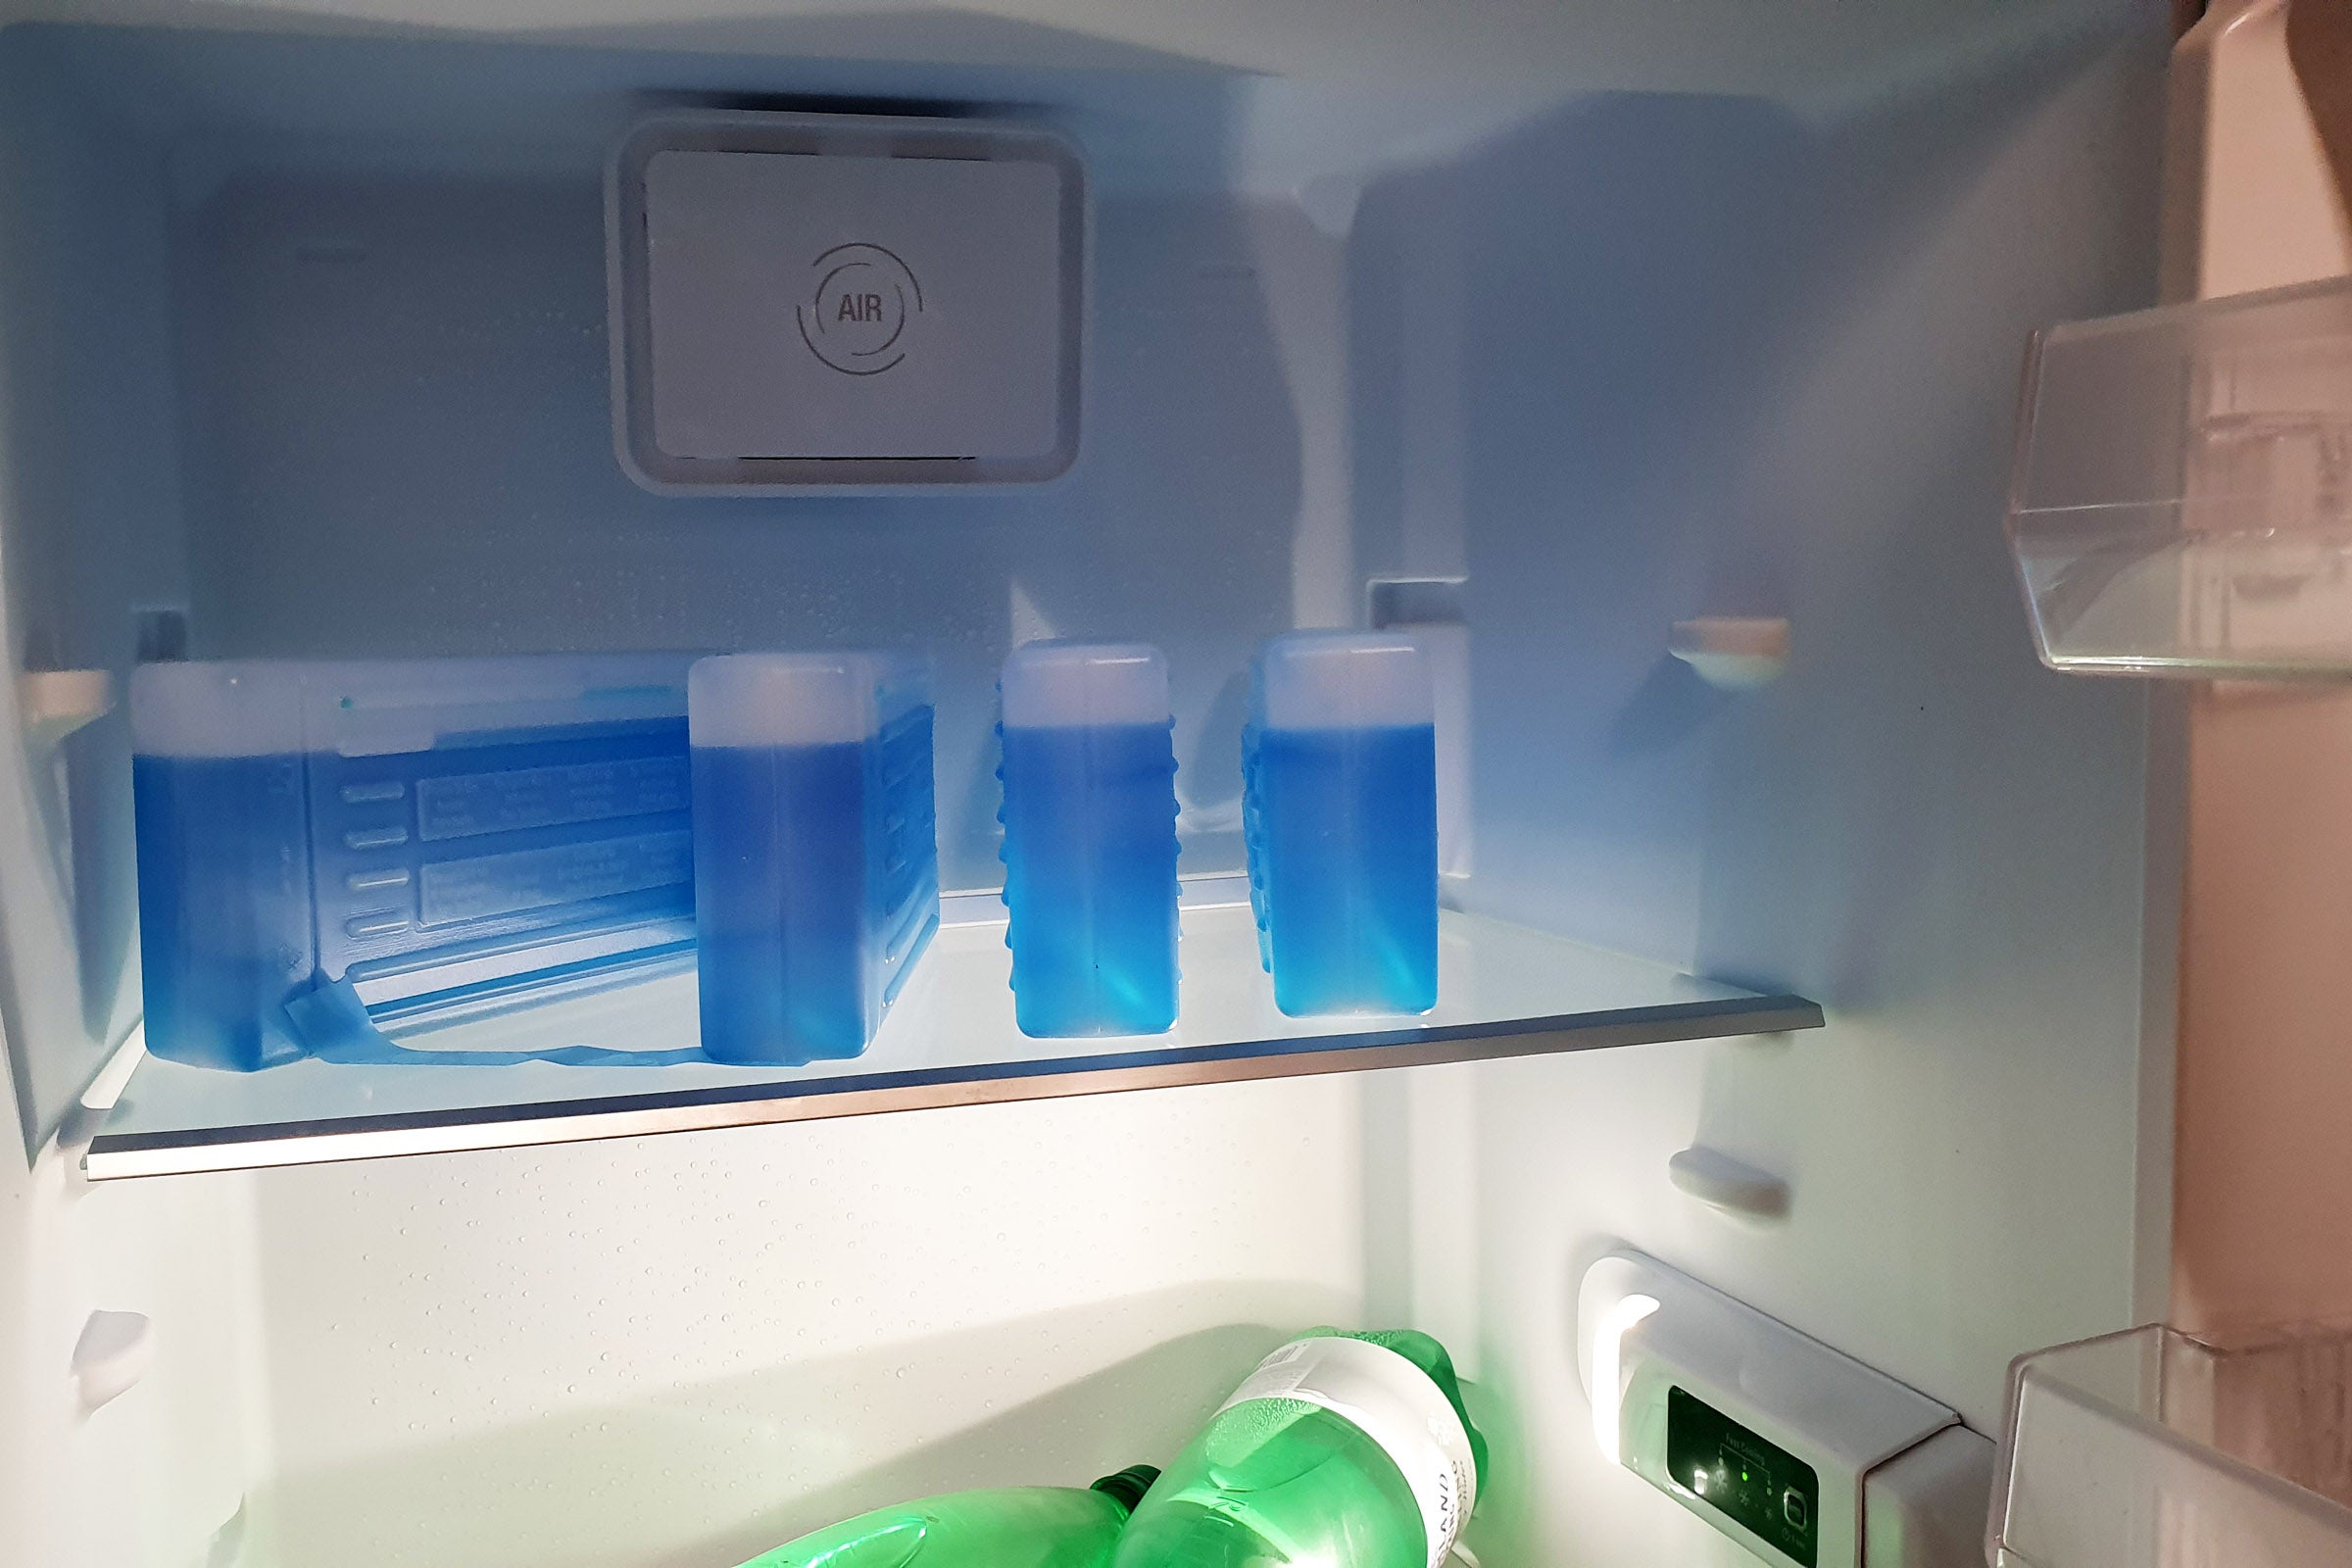 Inside view of trays of a fridge with bottles laid on them